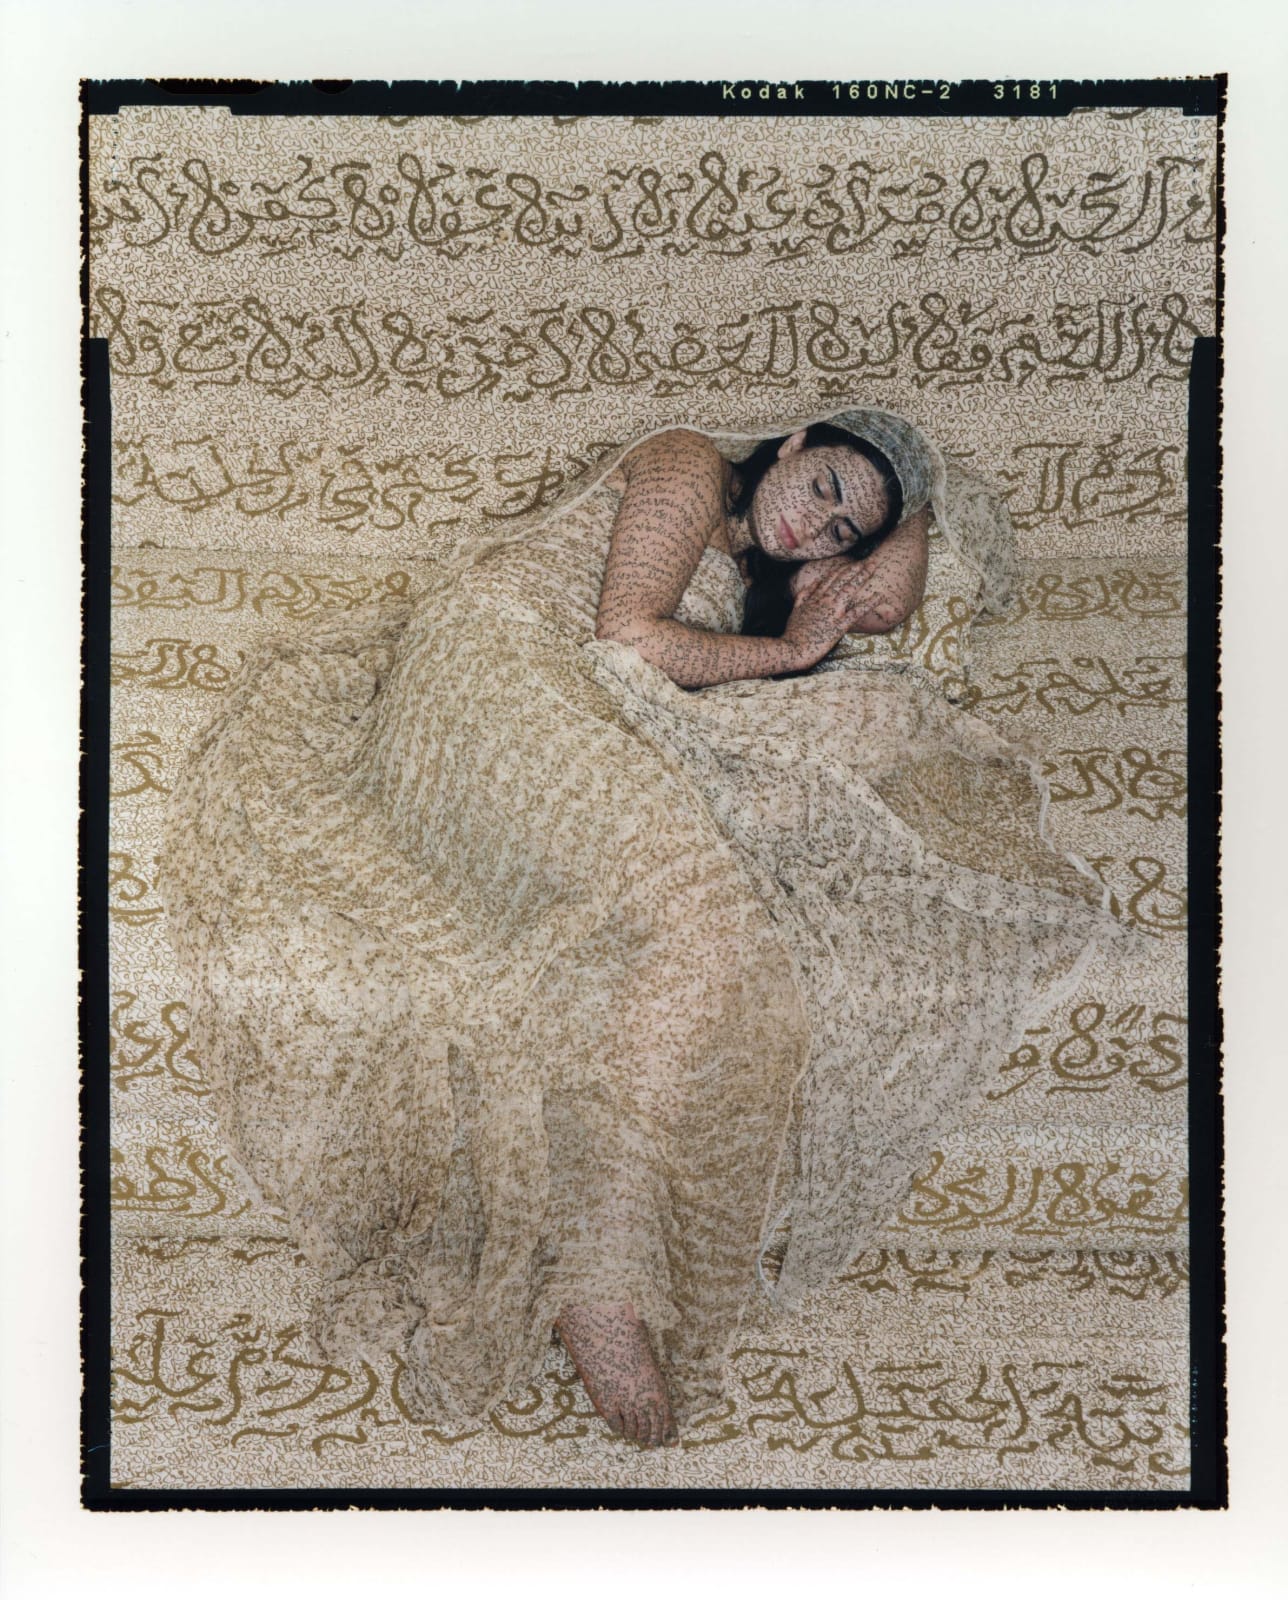 Woman reclining with henna calligraphy inscribed on clothing fabric and skin, from the Les Femmes du Maroc series, by Lalla Essaydi